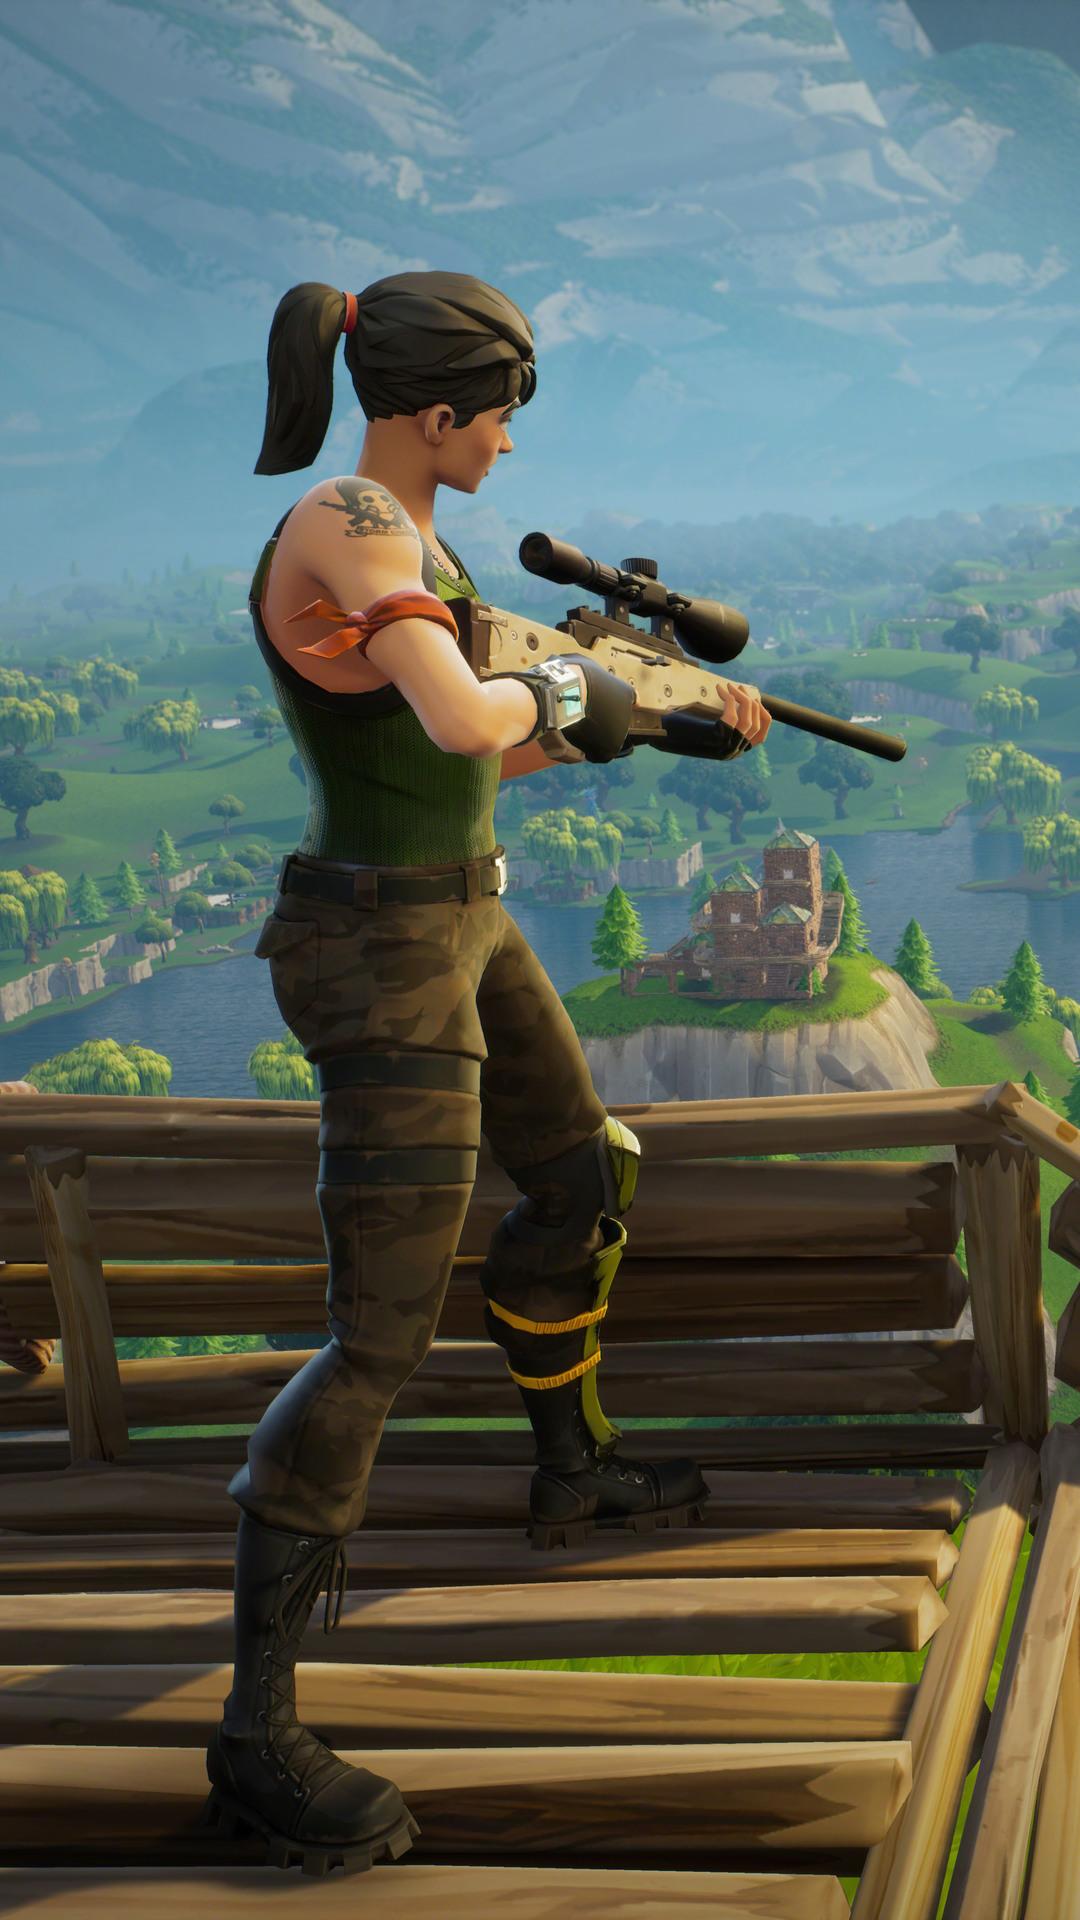 Fortnite Sniper 4k wallpaper for iPhone and Android